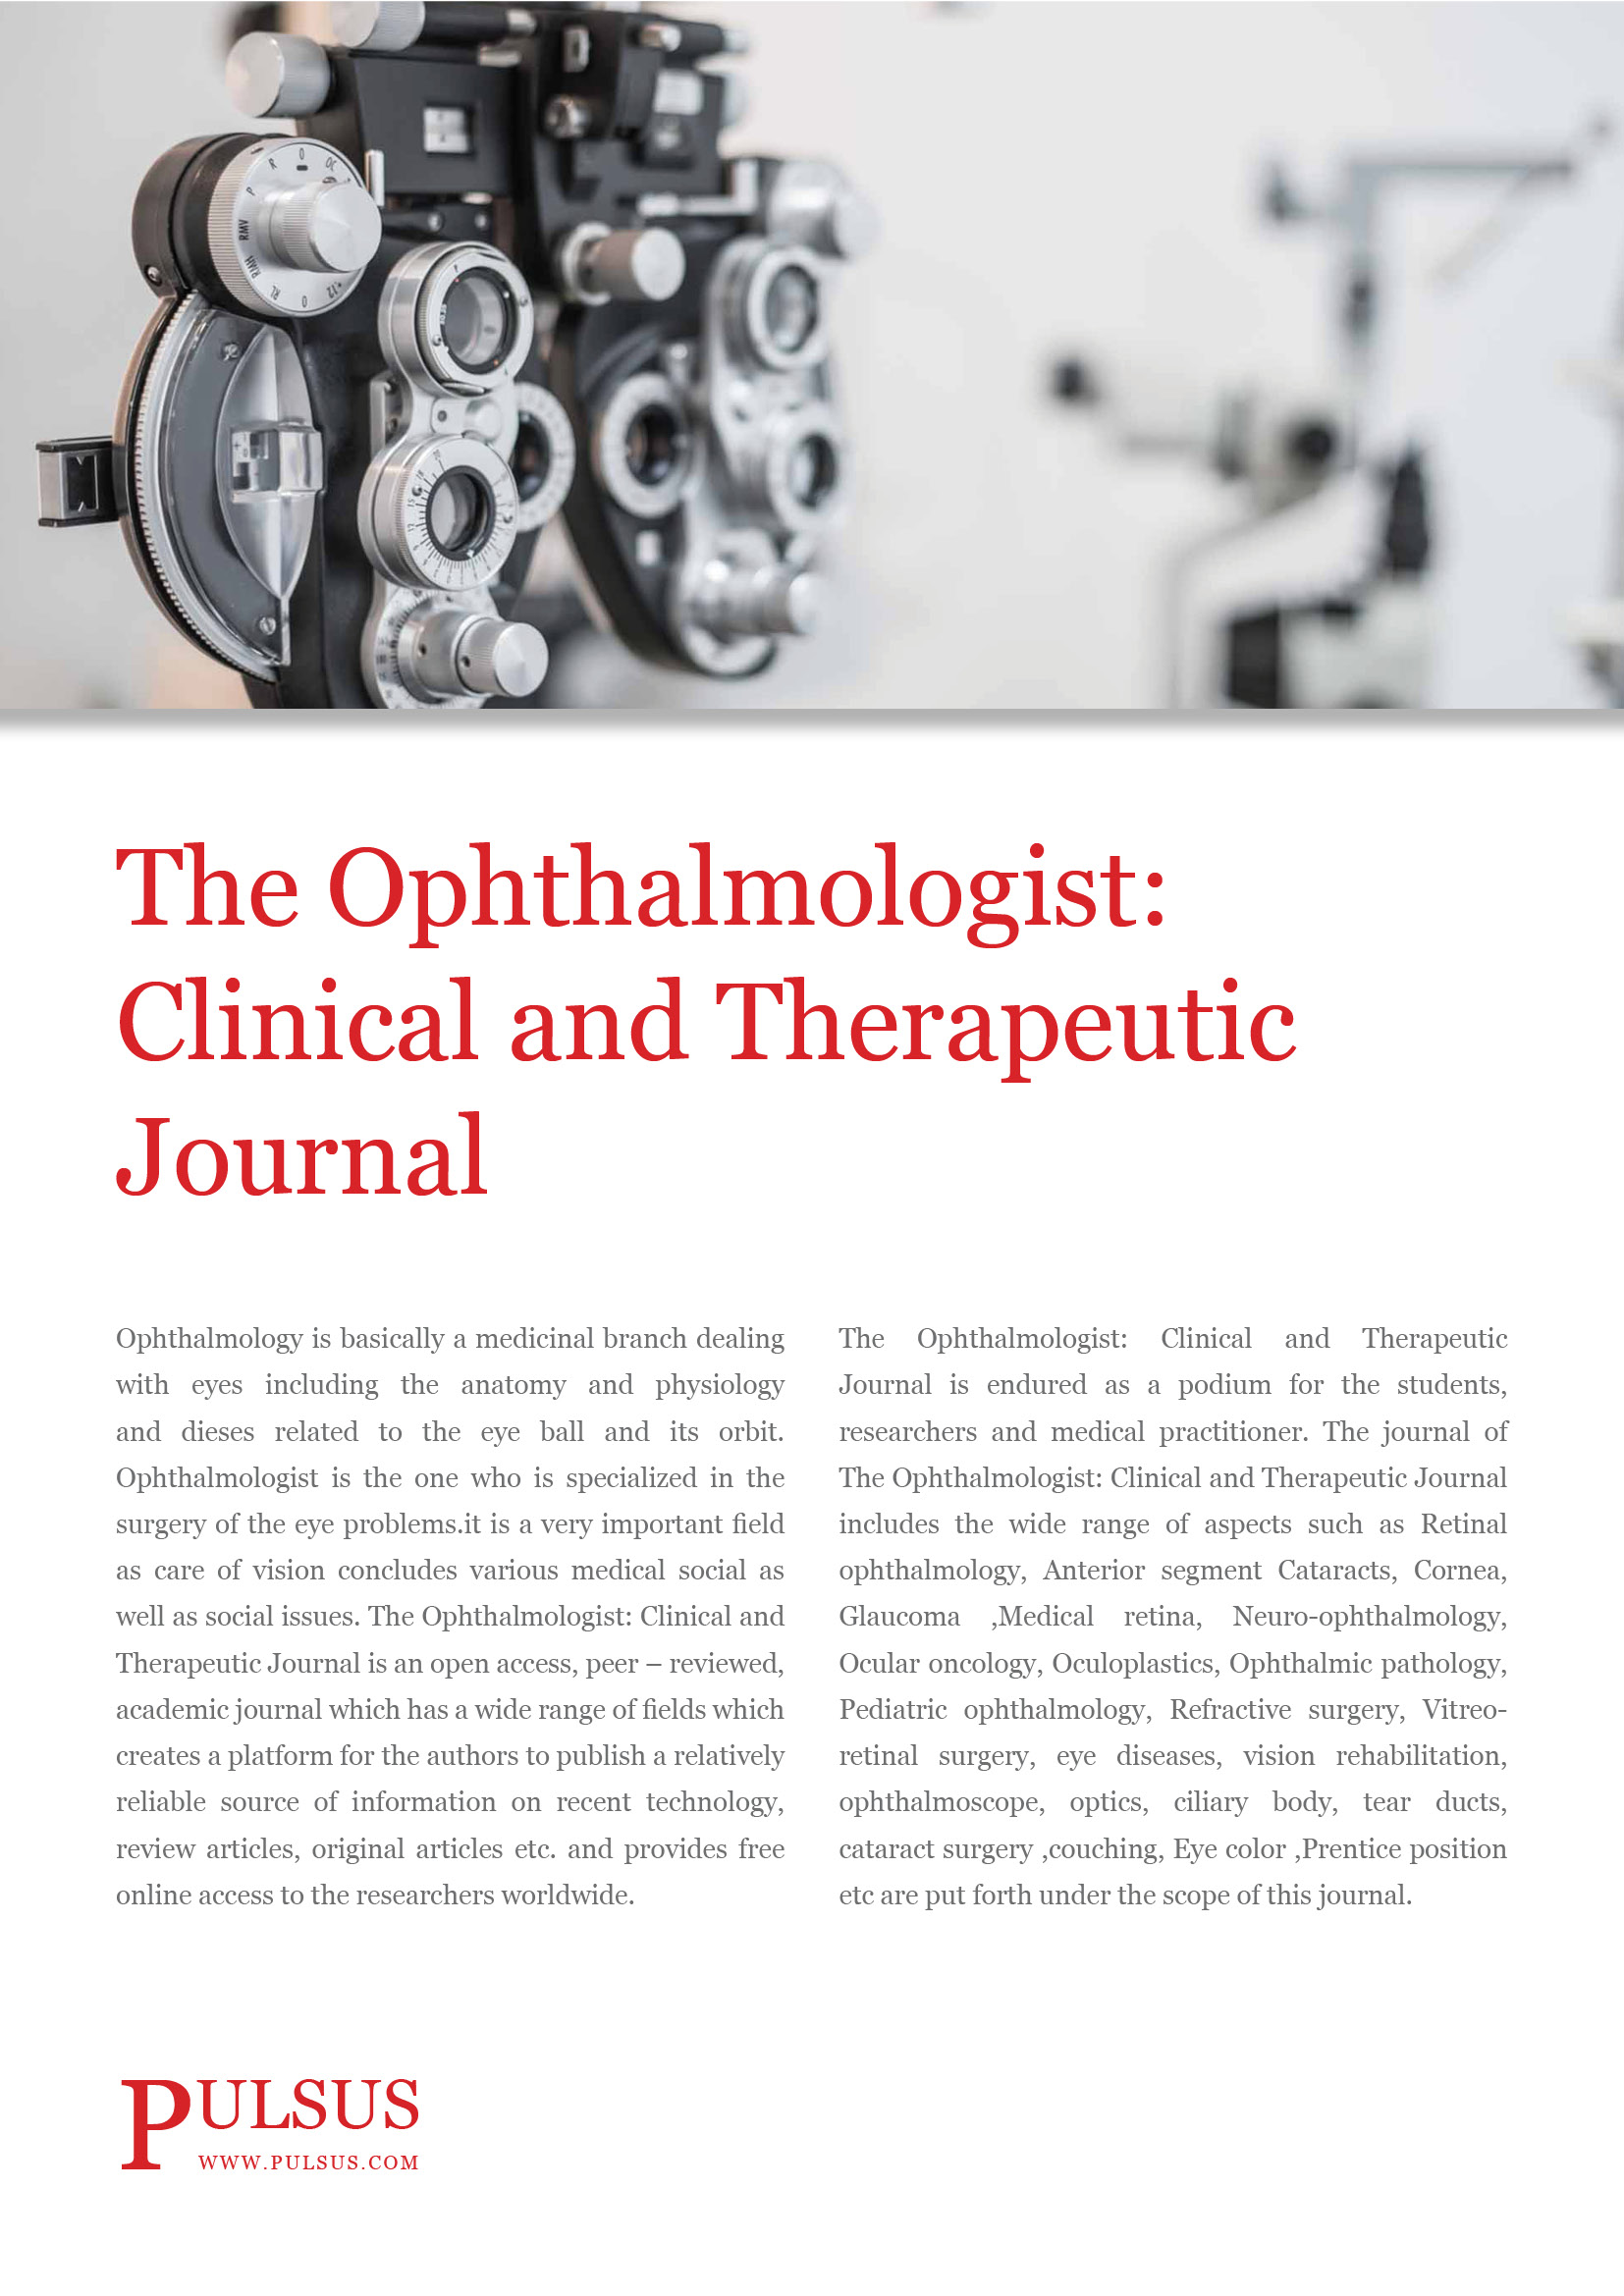 The Ophthalmologist: Clinical and Therapeutic Journal